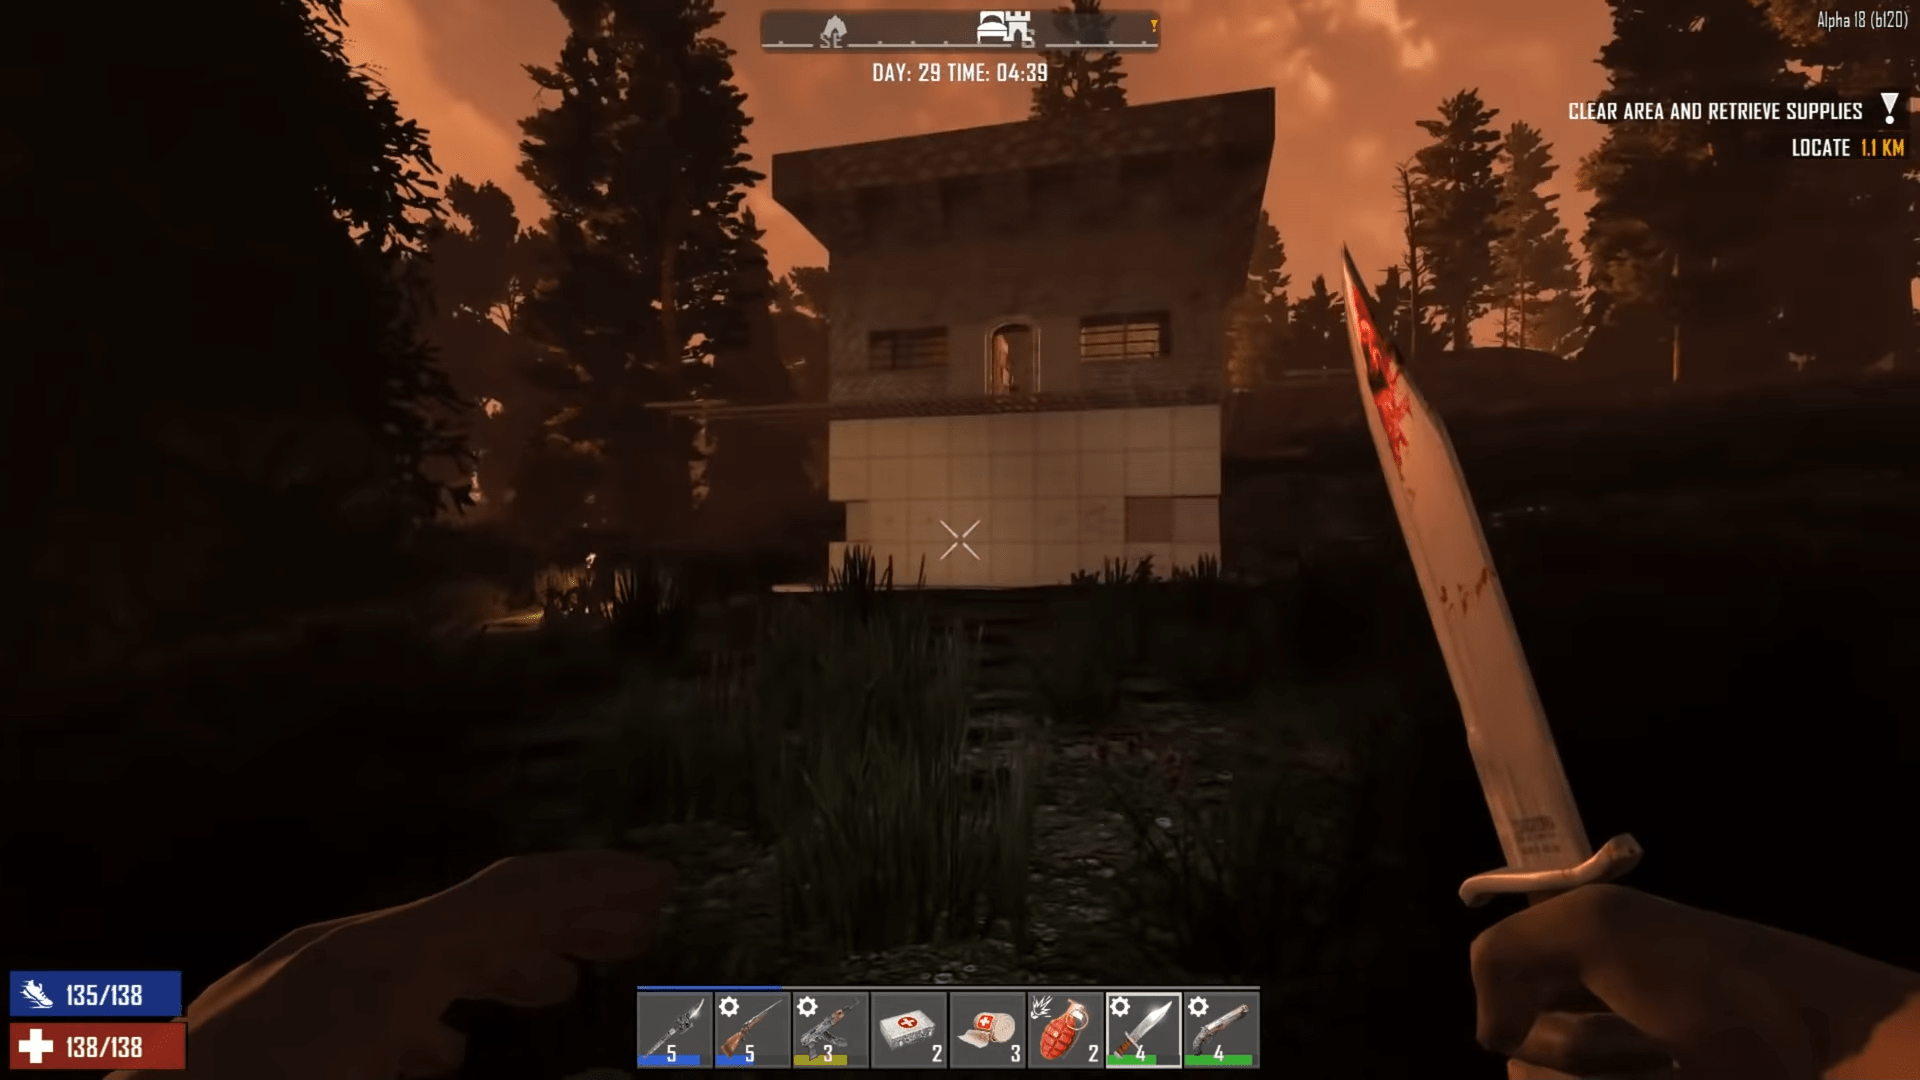 Early Access Zombie Survival Game 7 Days To Die Receives A New Patch, A18, Tons Of New Content As They Inch Closer To Release